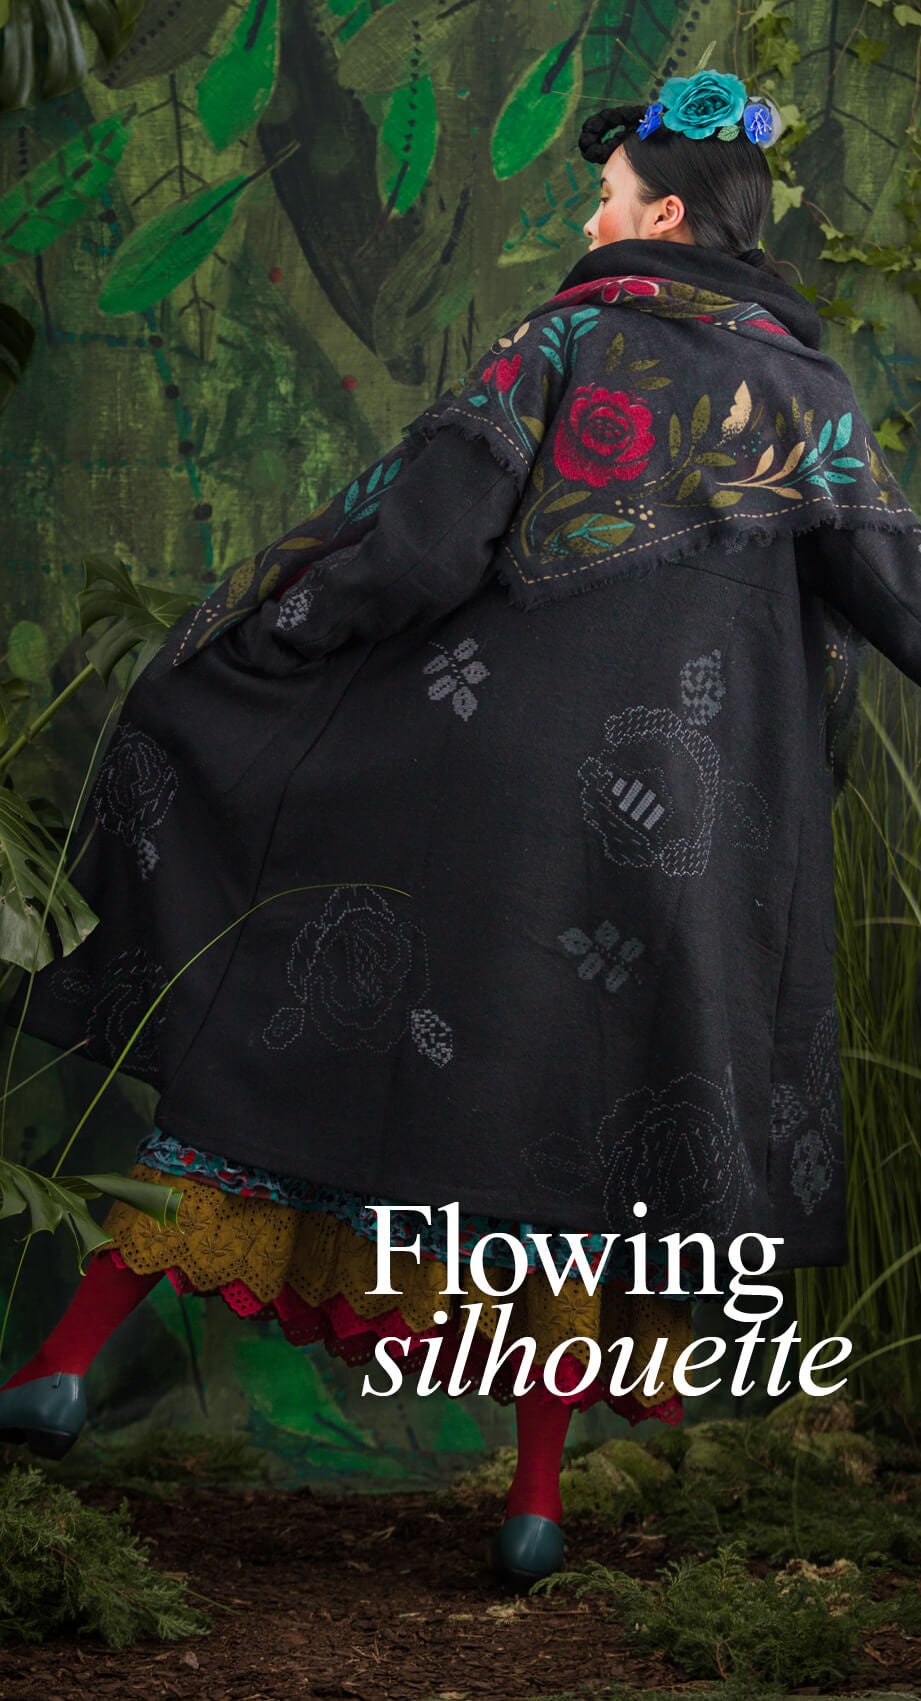 Large embroidered roses with a graphic look adorn this finely crafted coat. 